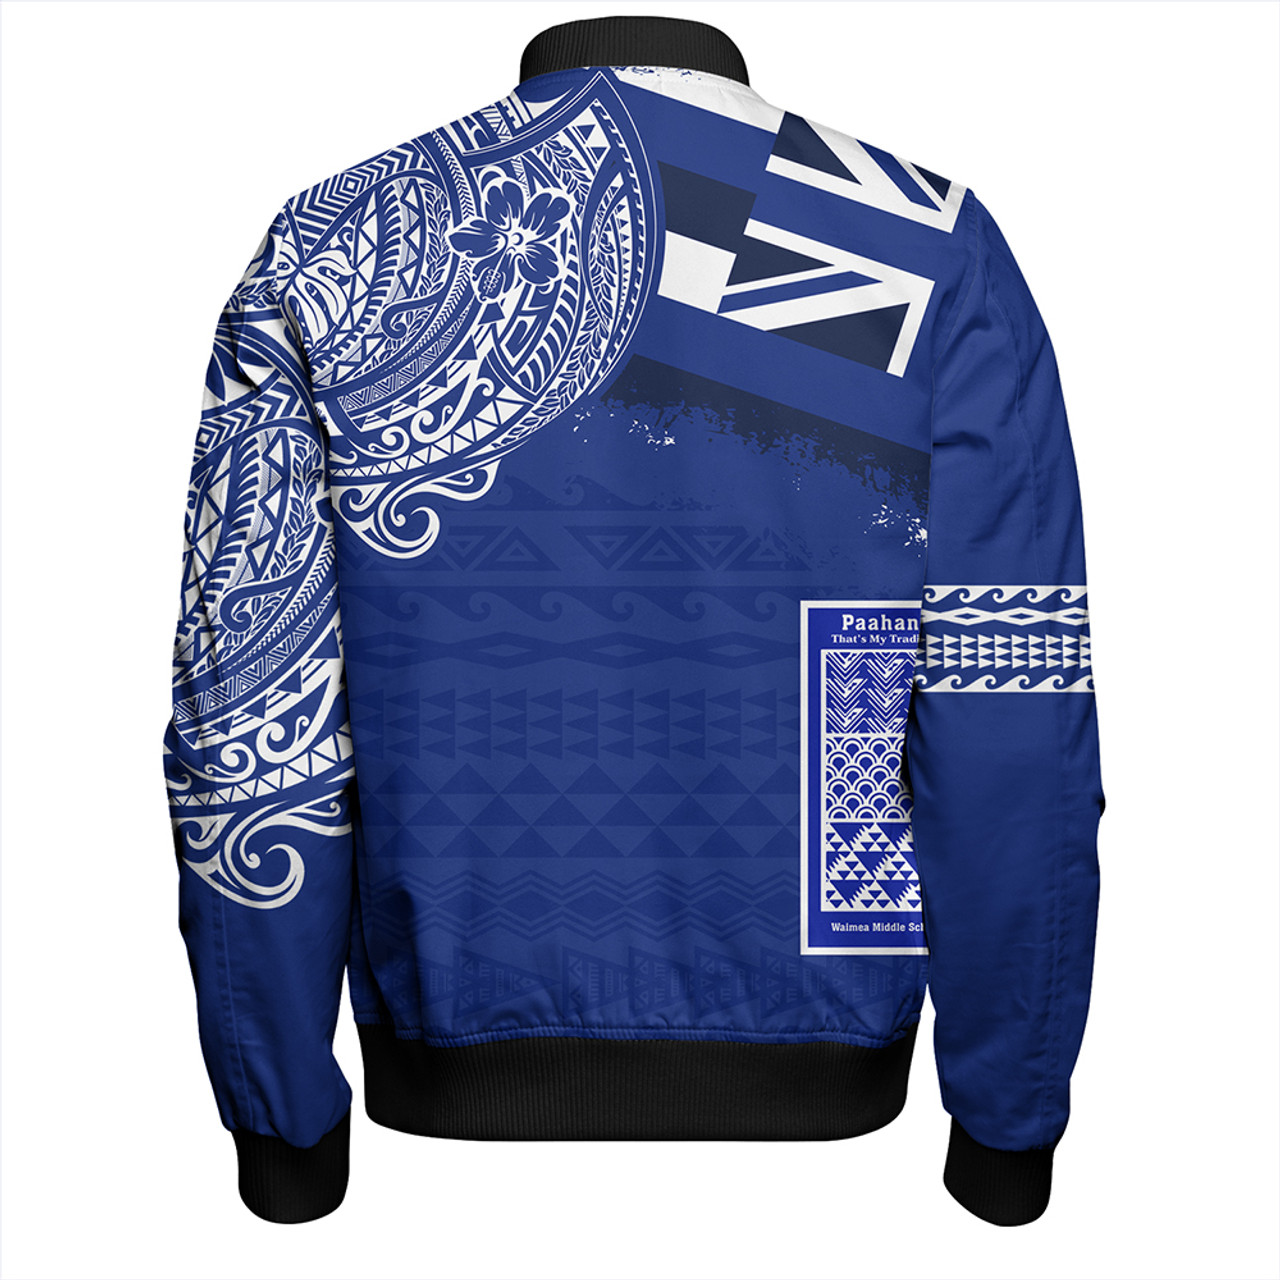 Hawaii Bomber Jacket Waimea Middle Public Conversion Charter School With Crest Style